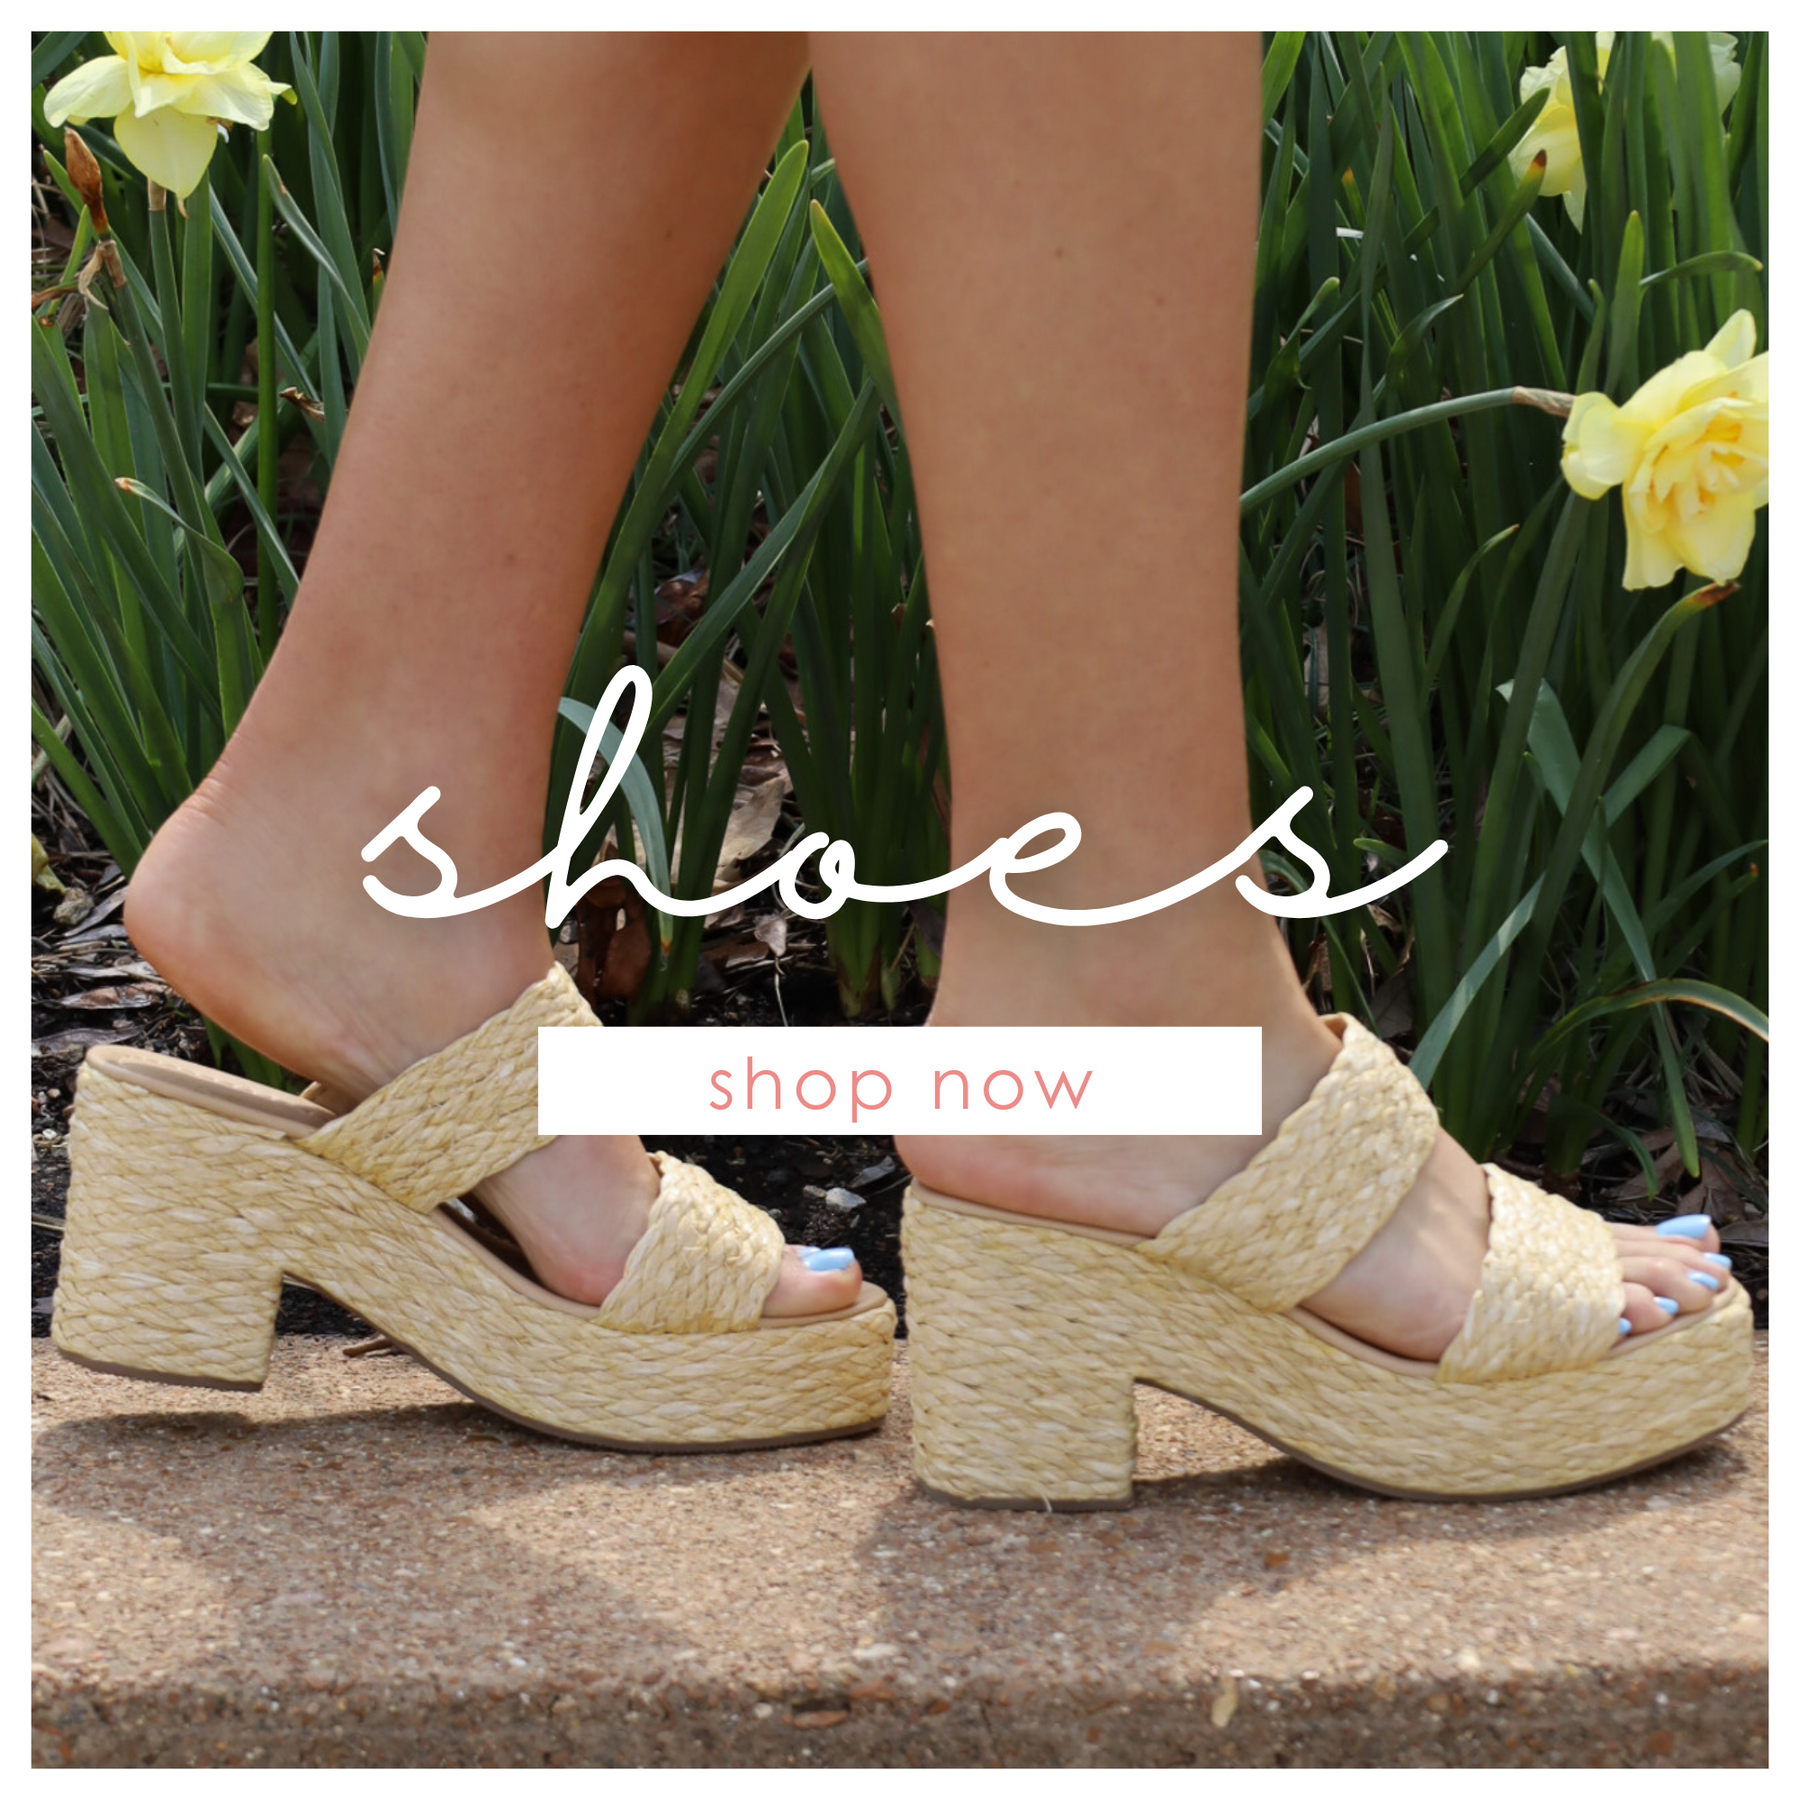 Shop our new heels and sandals for spring now! 